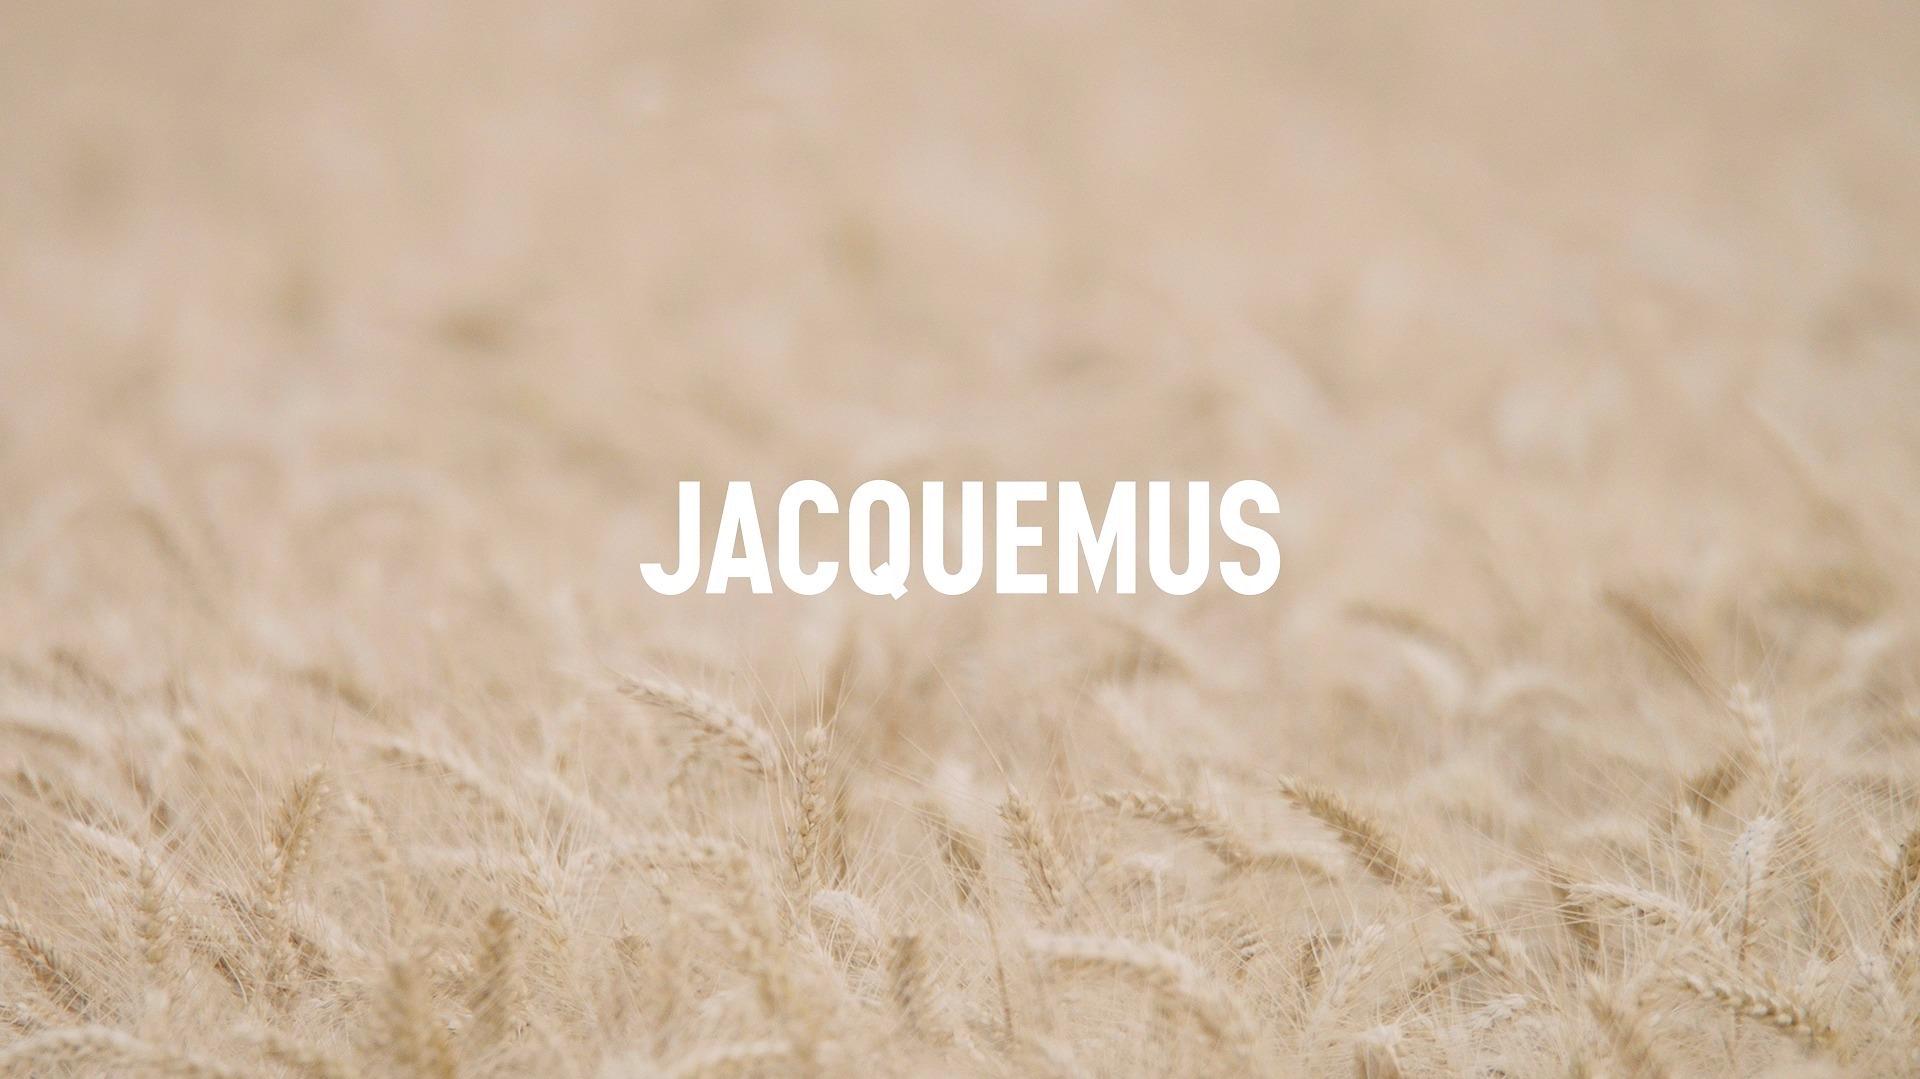 Jacquemus Ss21 L Amour Video Bureaufuture Directed By